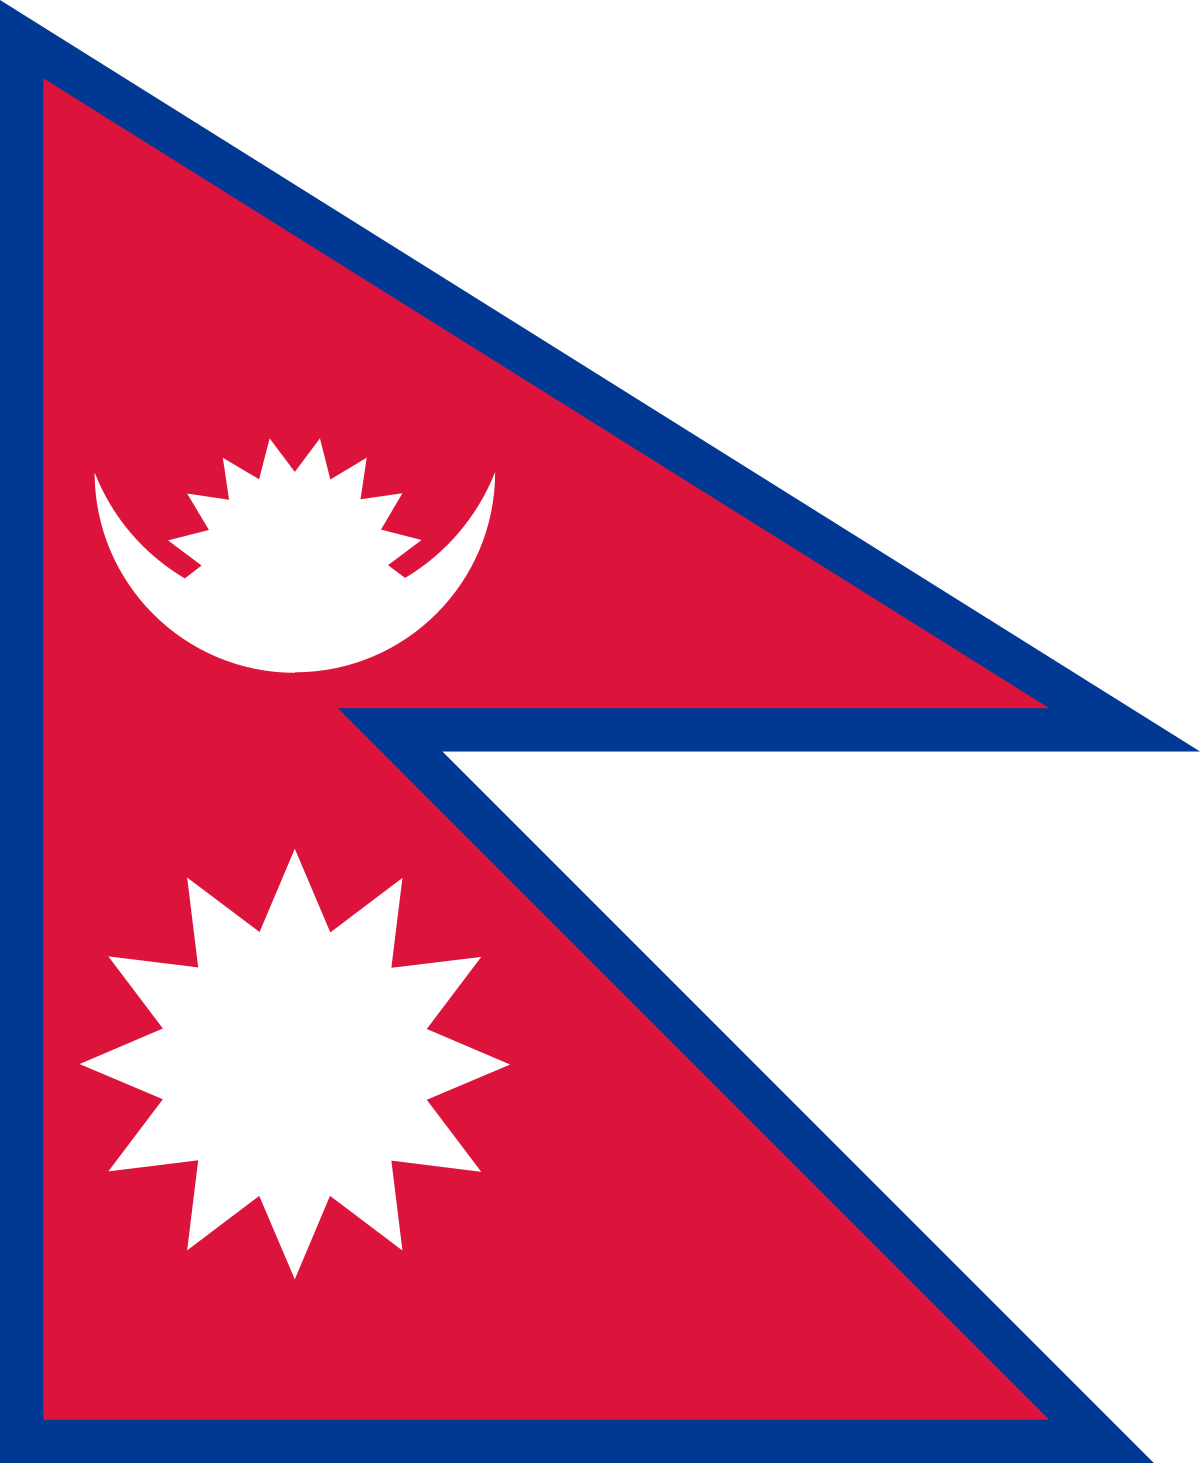 Blue with a Red Triangle Logo - Flag of Nepal